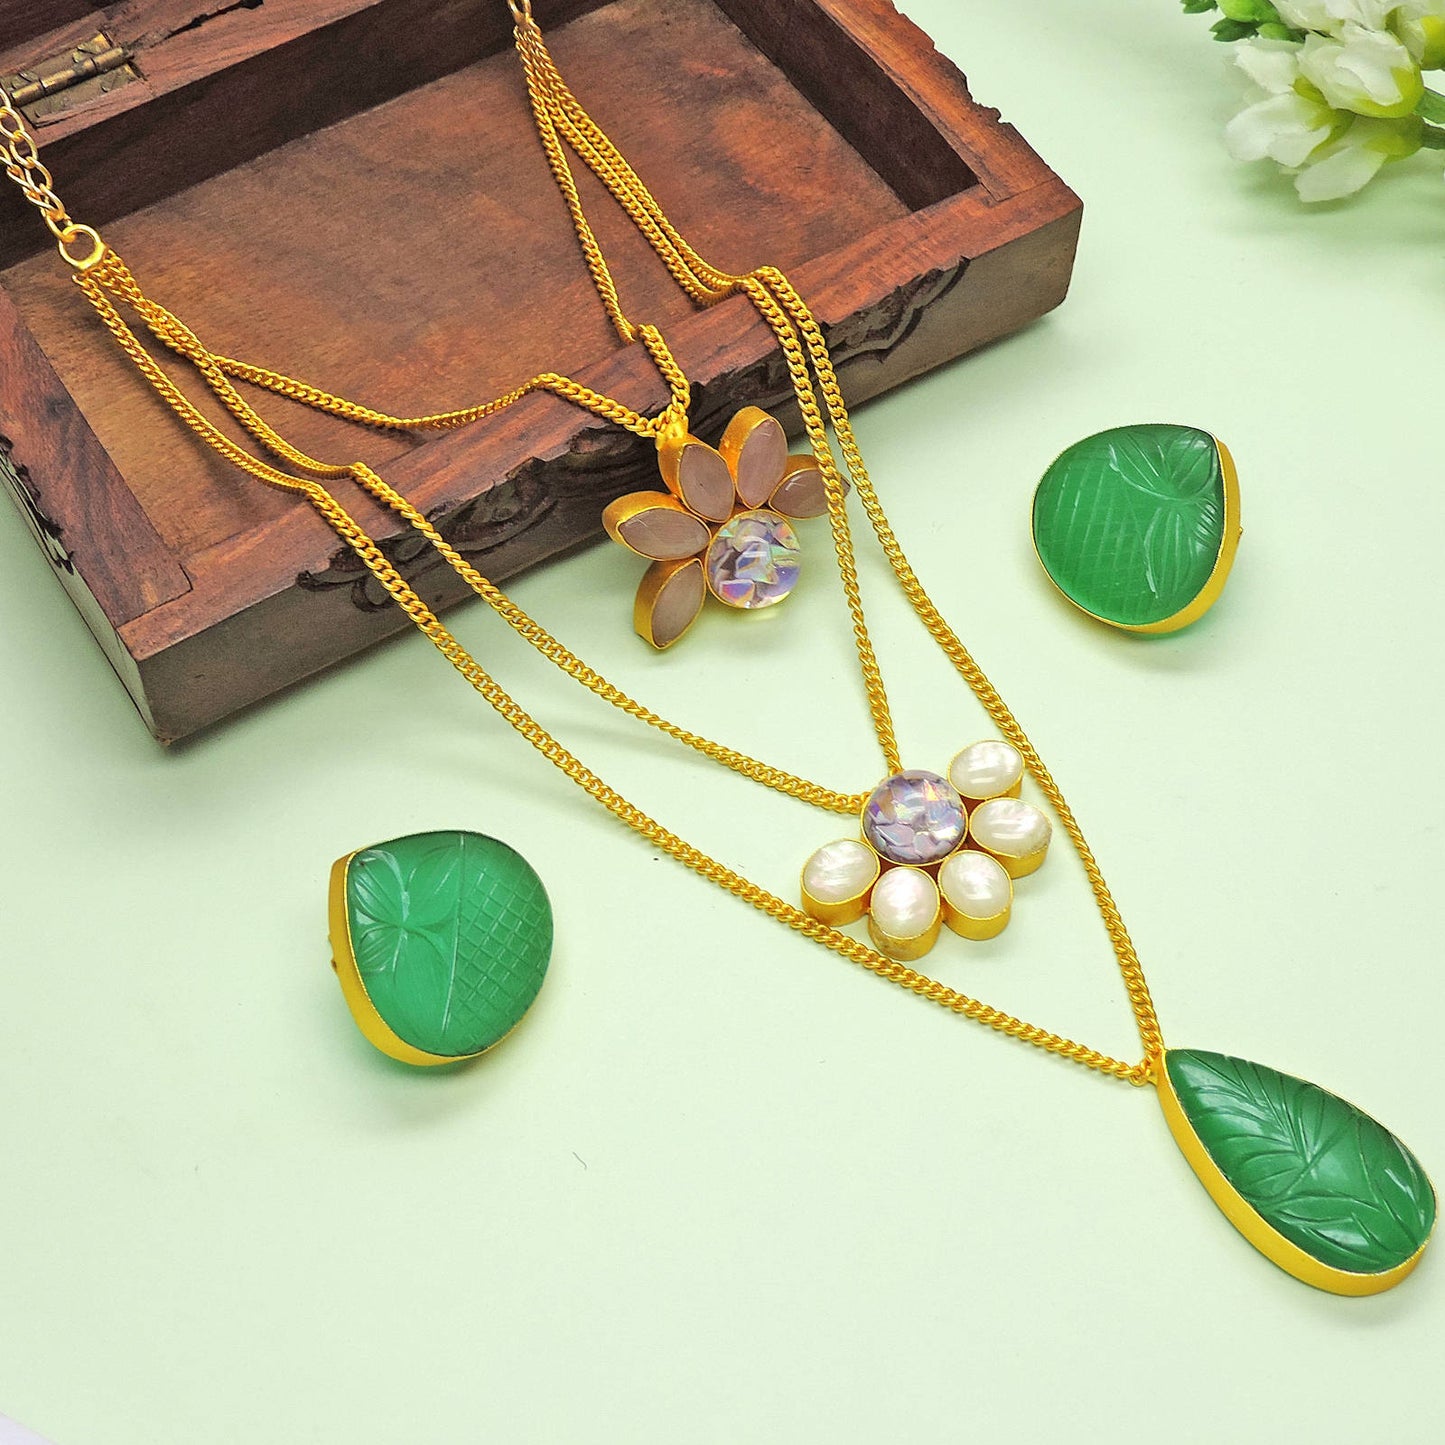 String of Colors Necklace.